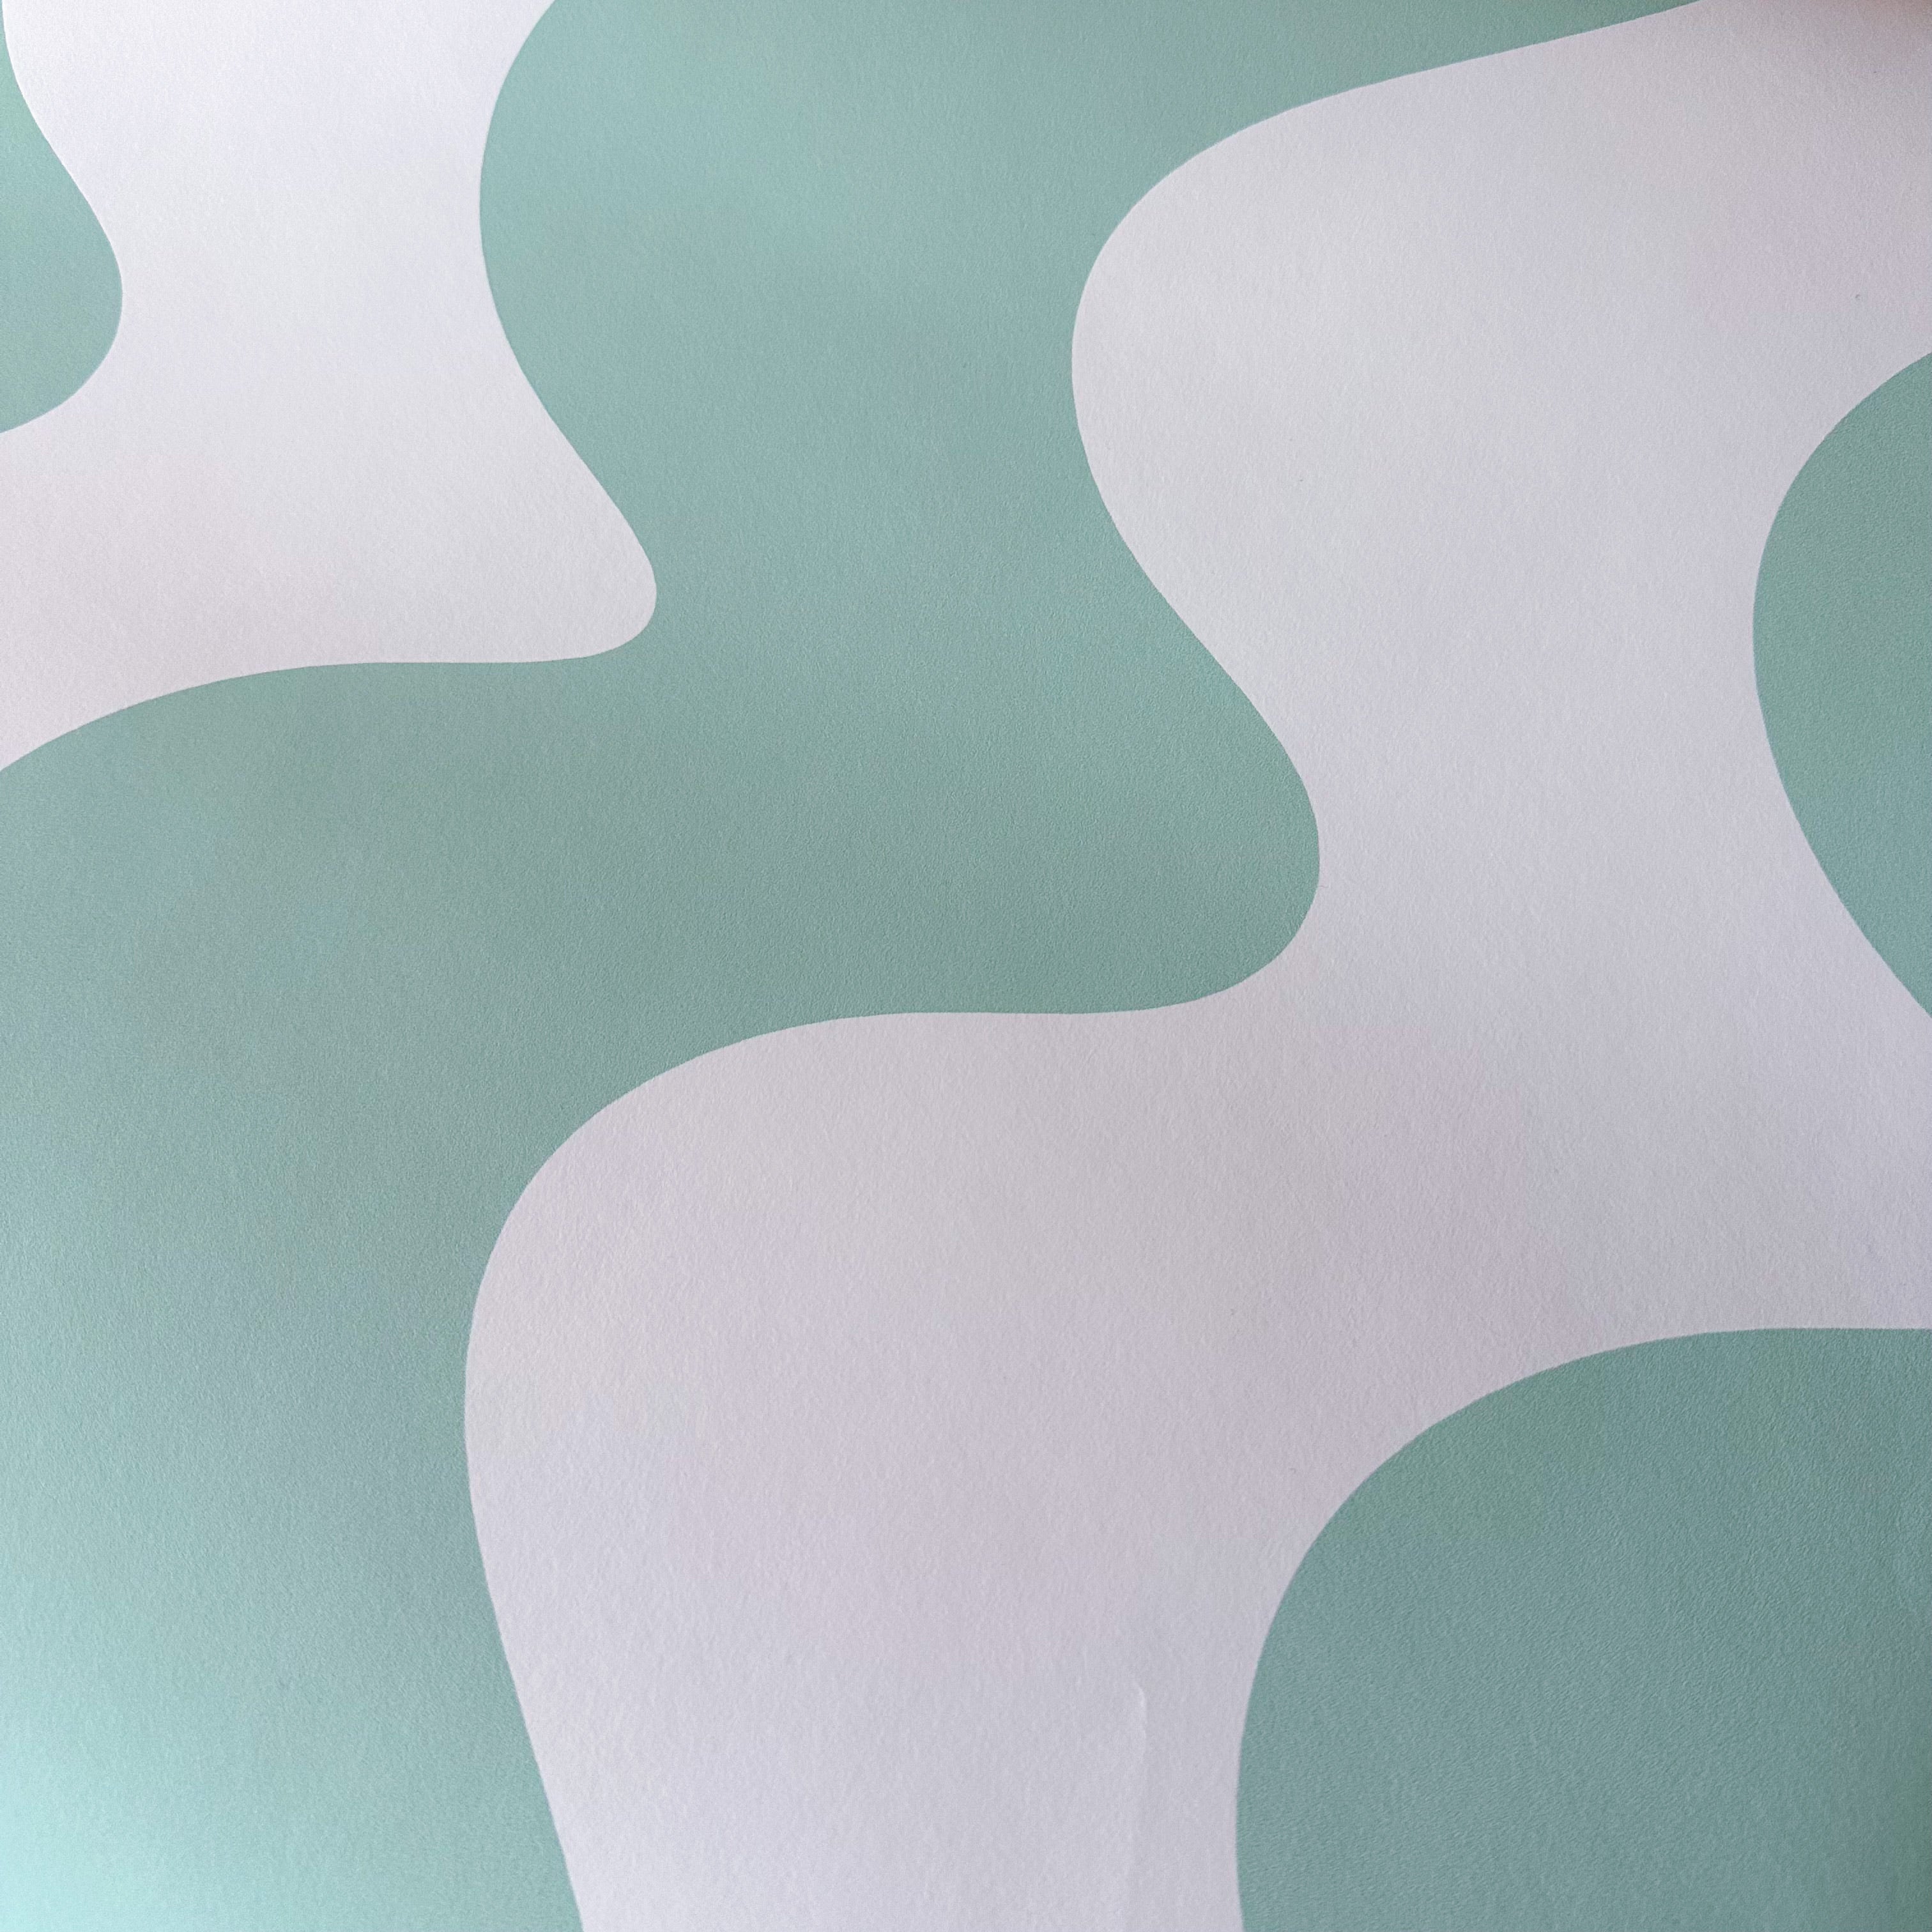 A close up of a wall with a pattern of abstract shapes in white and mint green. - Mint green, pastel green